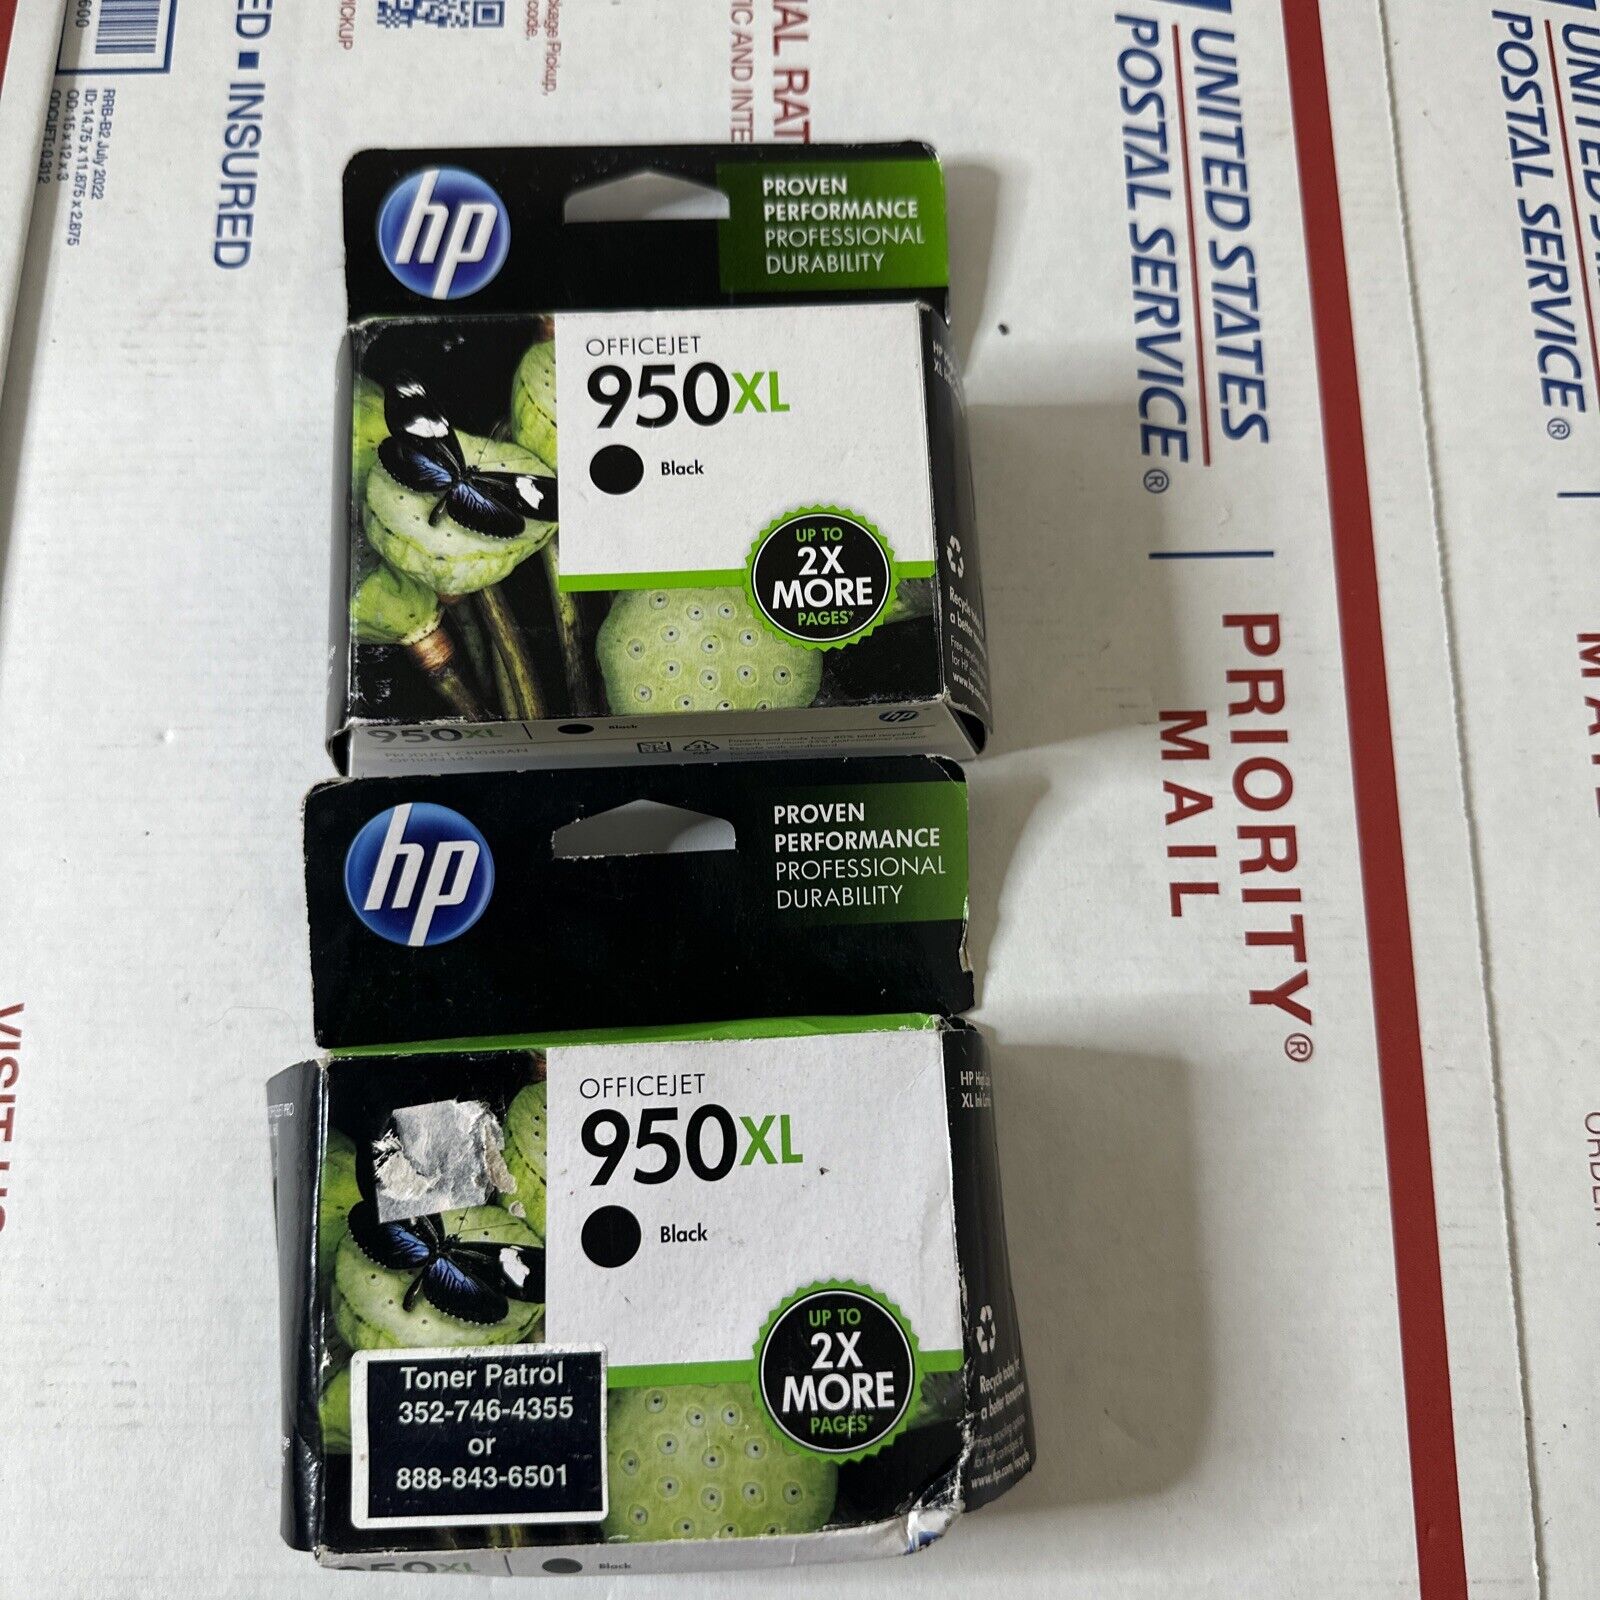 HP 950XL Black Ink 2 Count New Expire 08/2013 01/2015